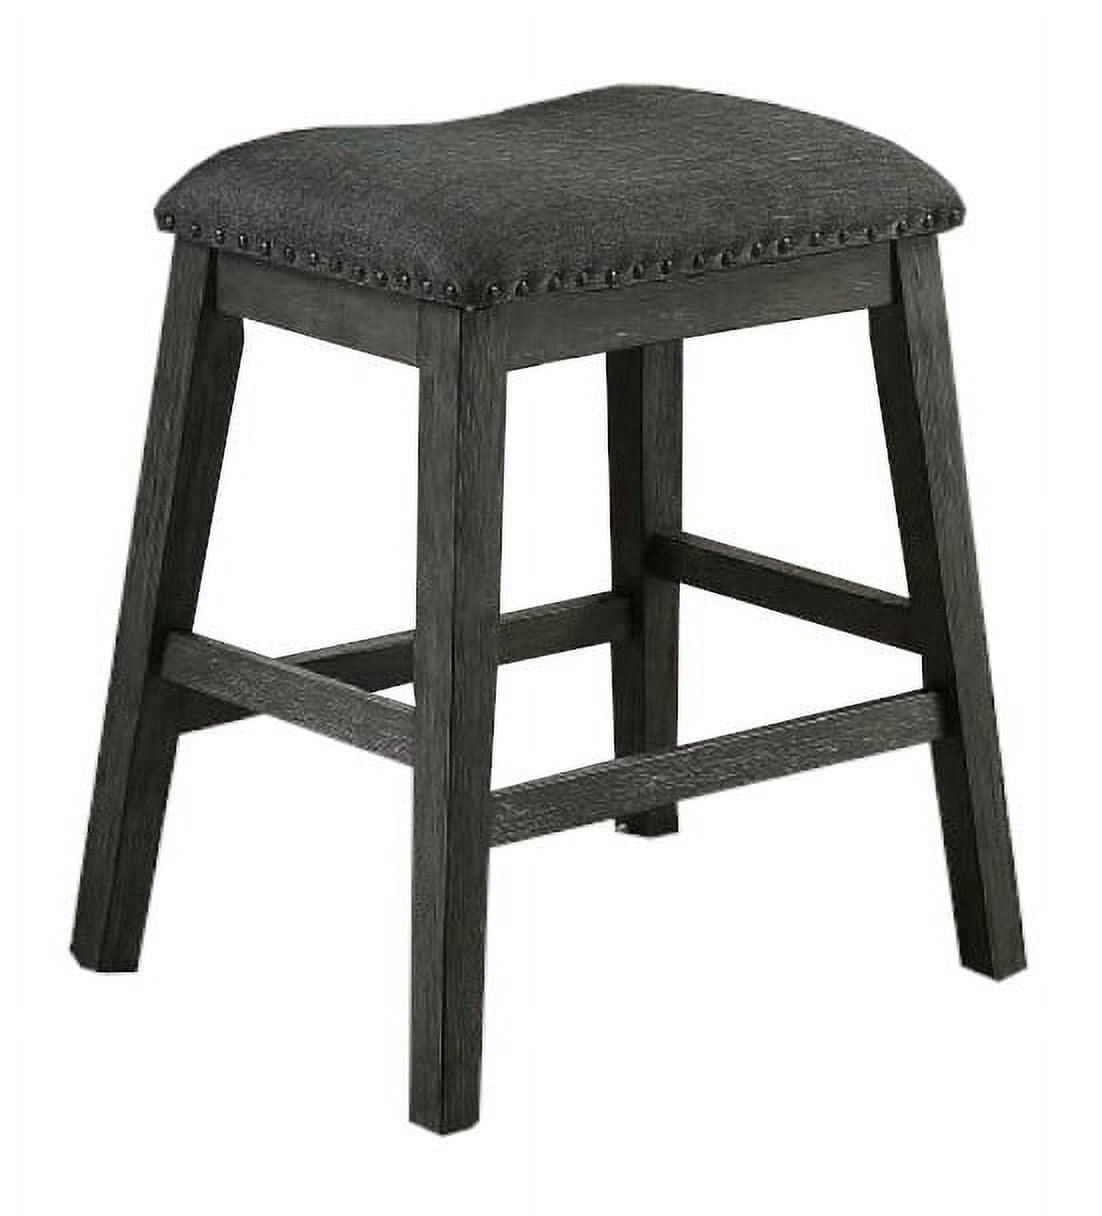 Gray Linen Upholstered Saddle Counter Stool with Nailhead Trim